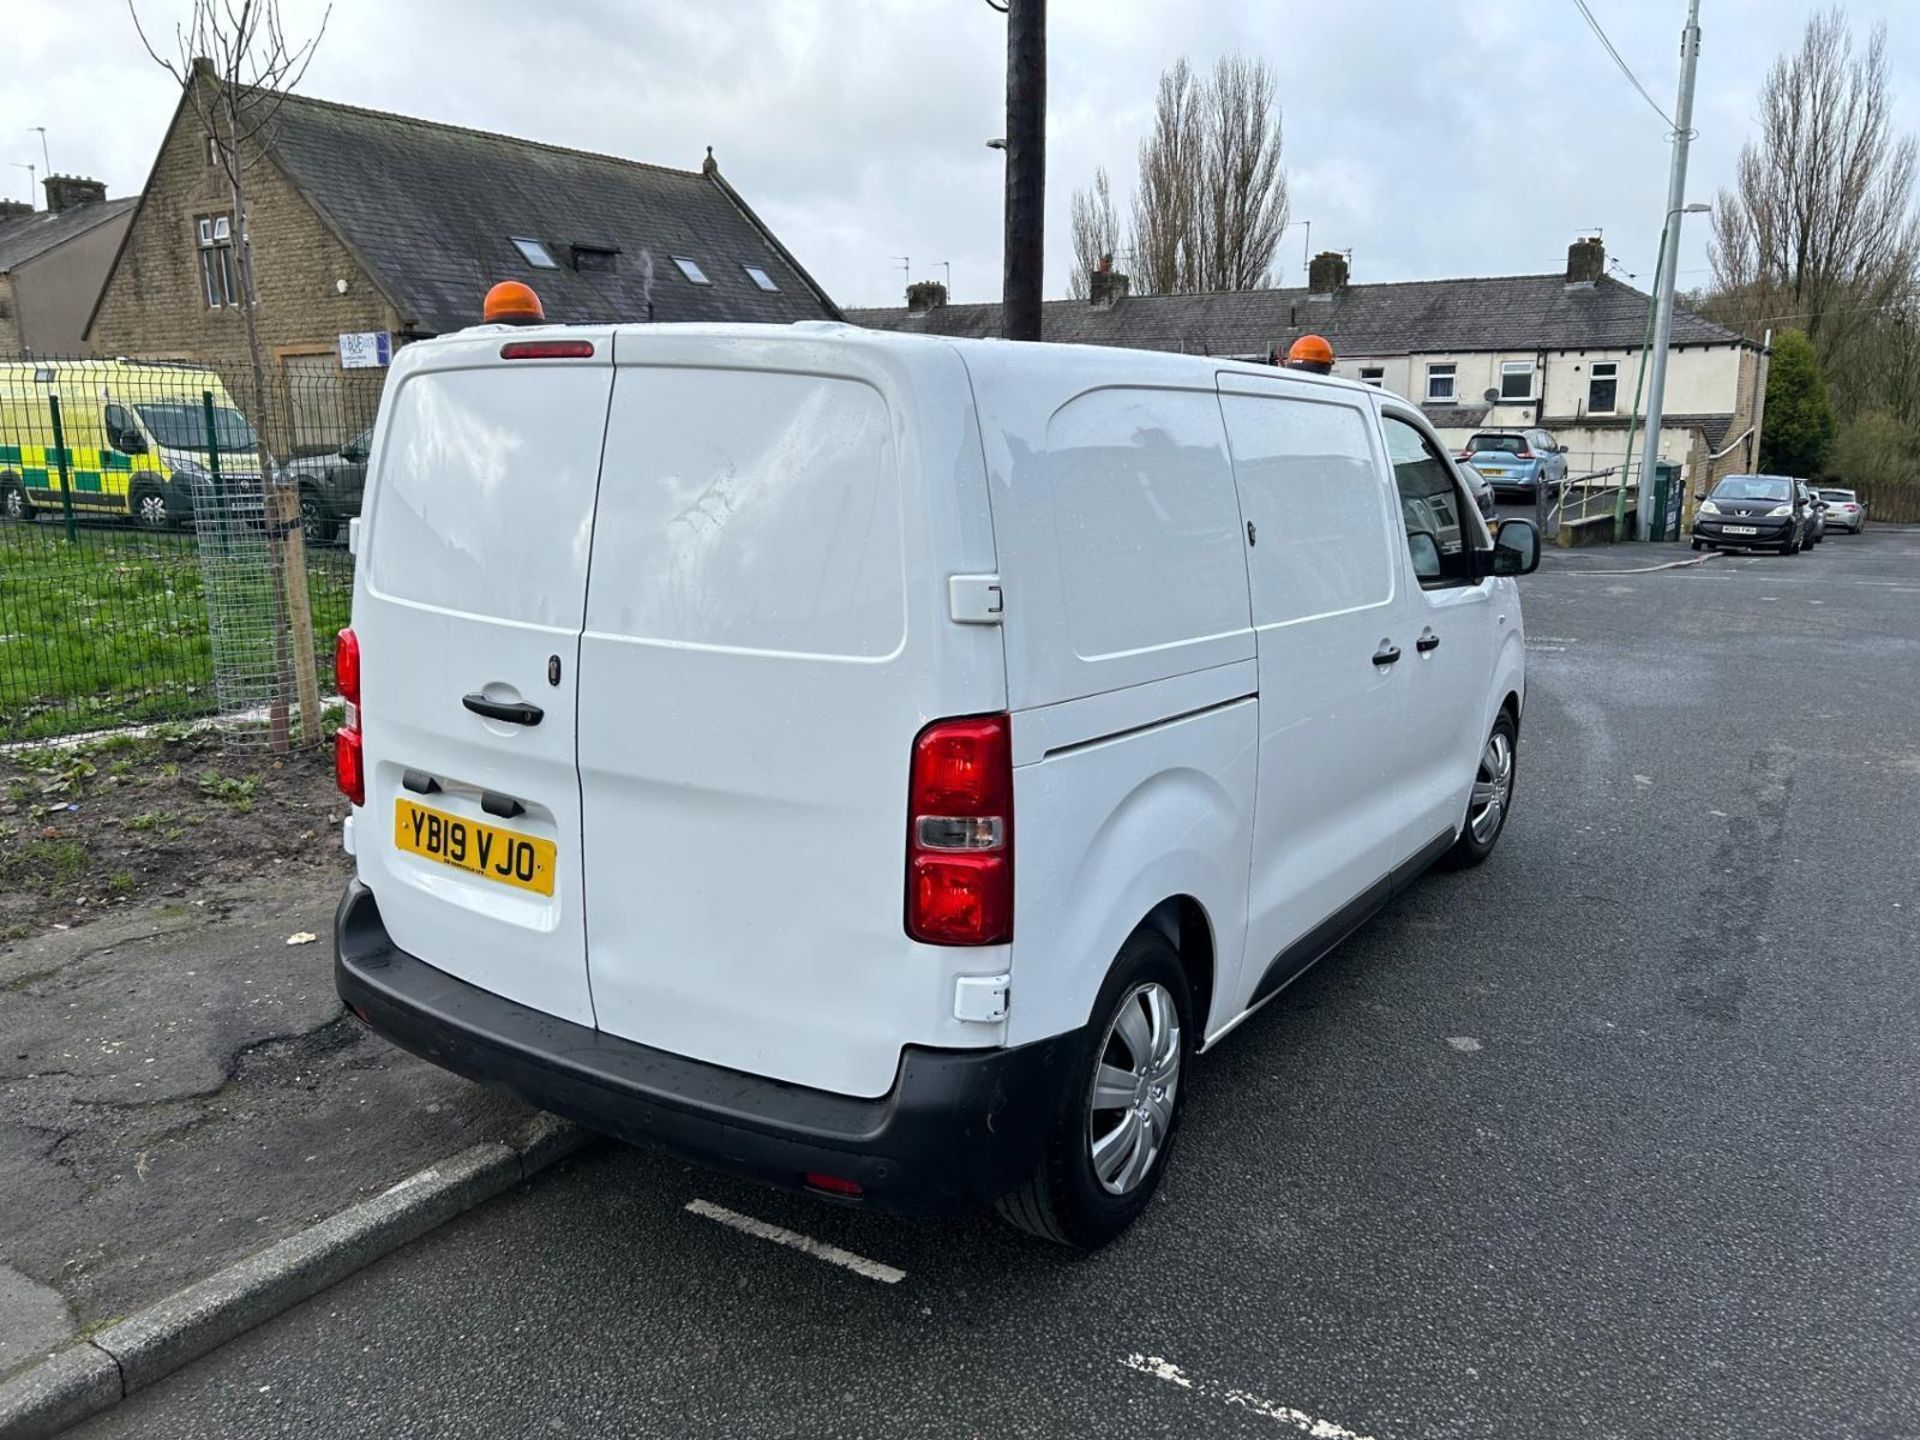 2019 CITROEN DISPATCH - 124K MILES - HPI CLEAR - READY TO GO ! - Image 10 of 12